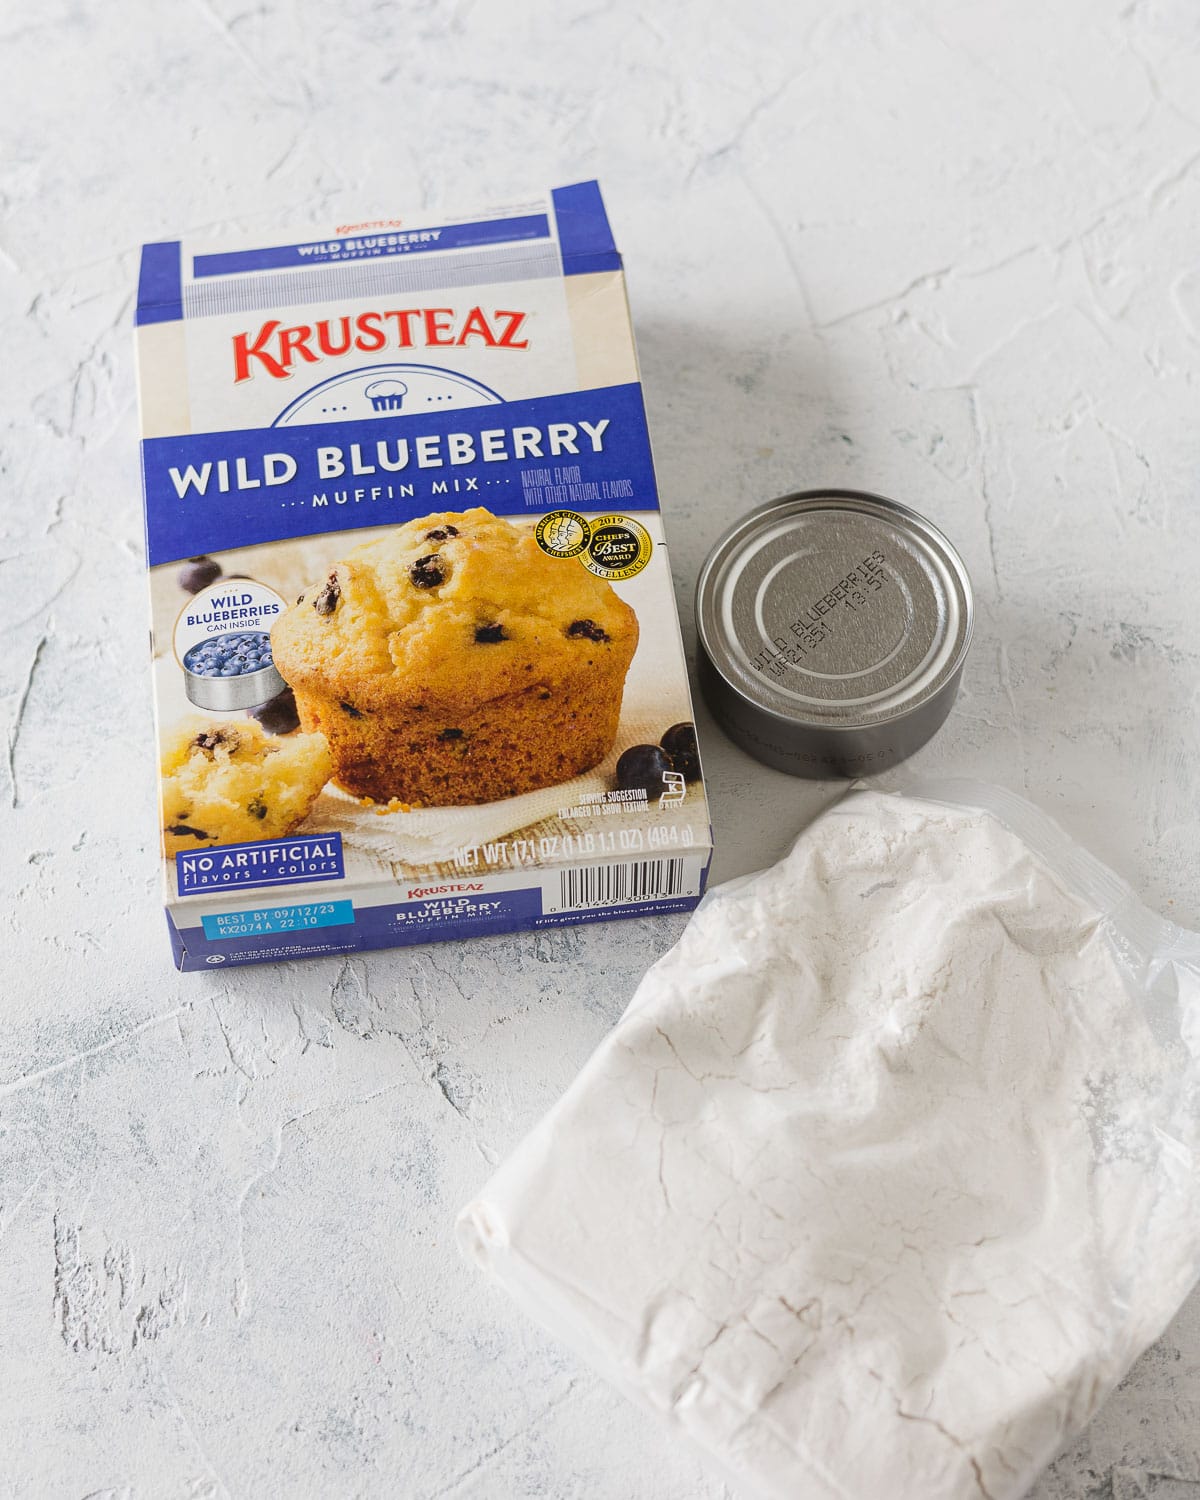 A box of blueberry muffin mix and the small can of blueberries that comes inside.